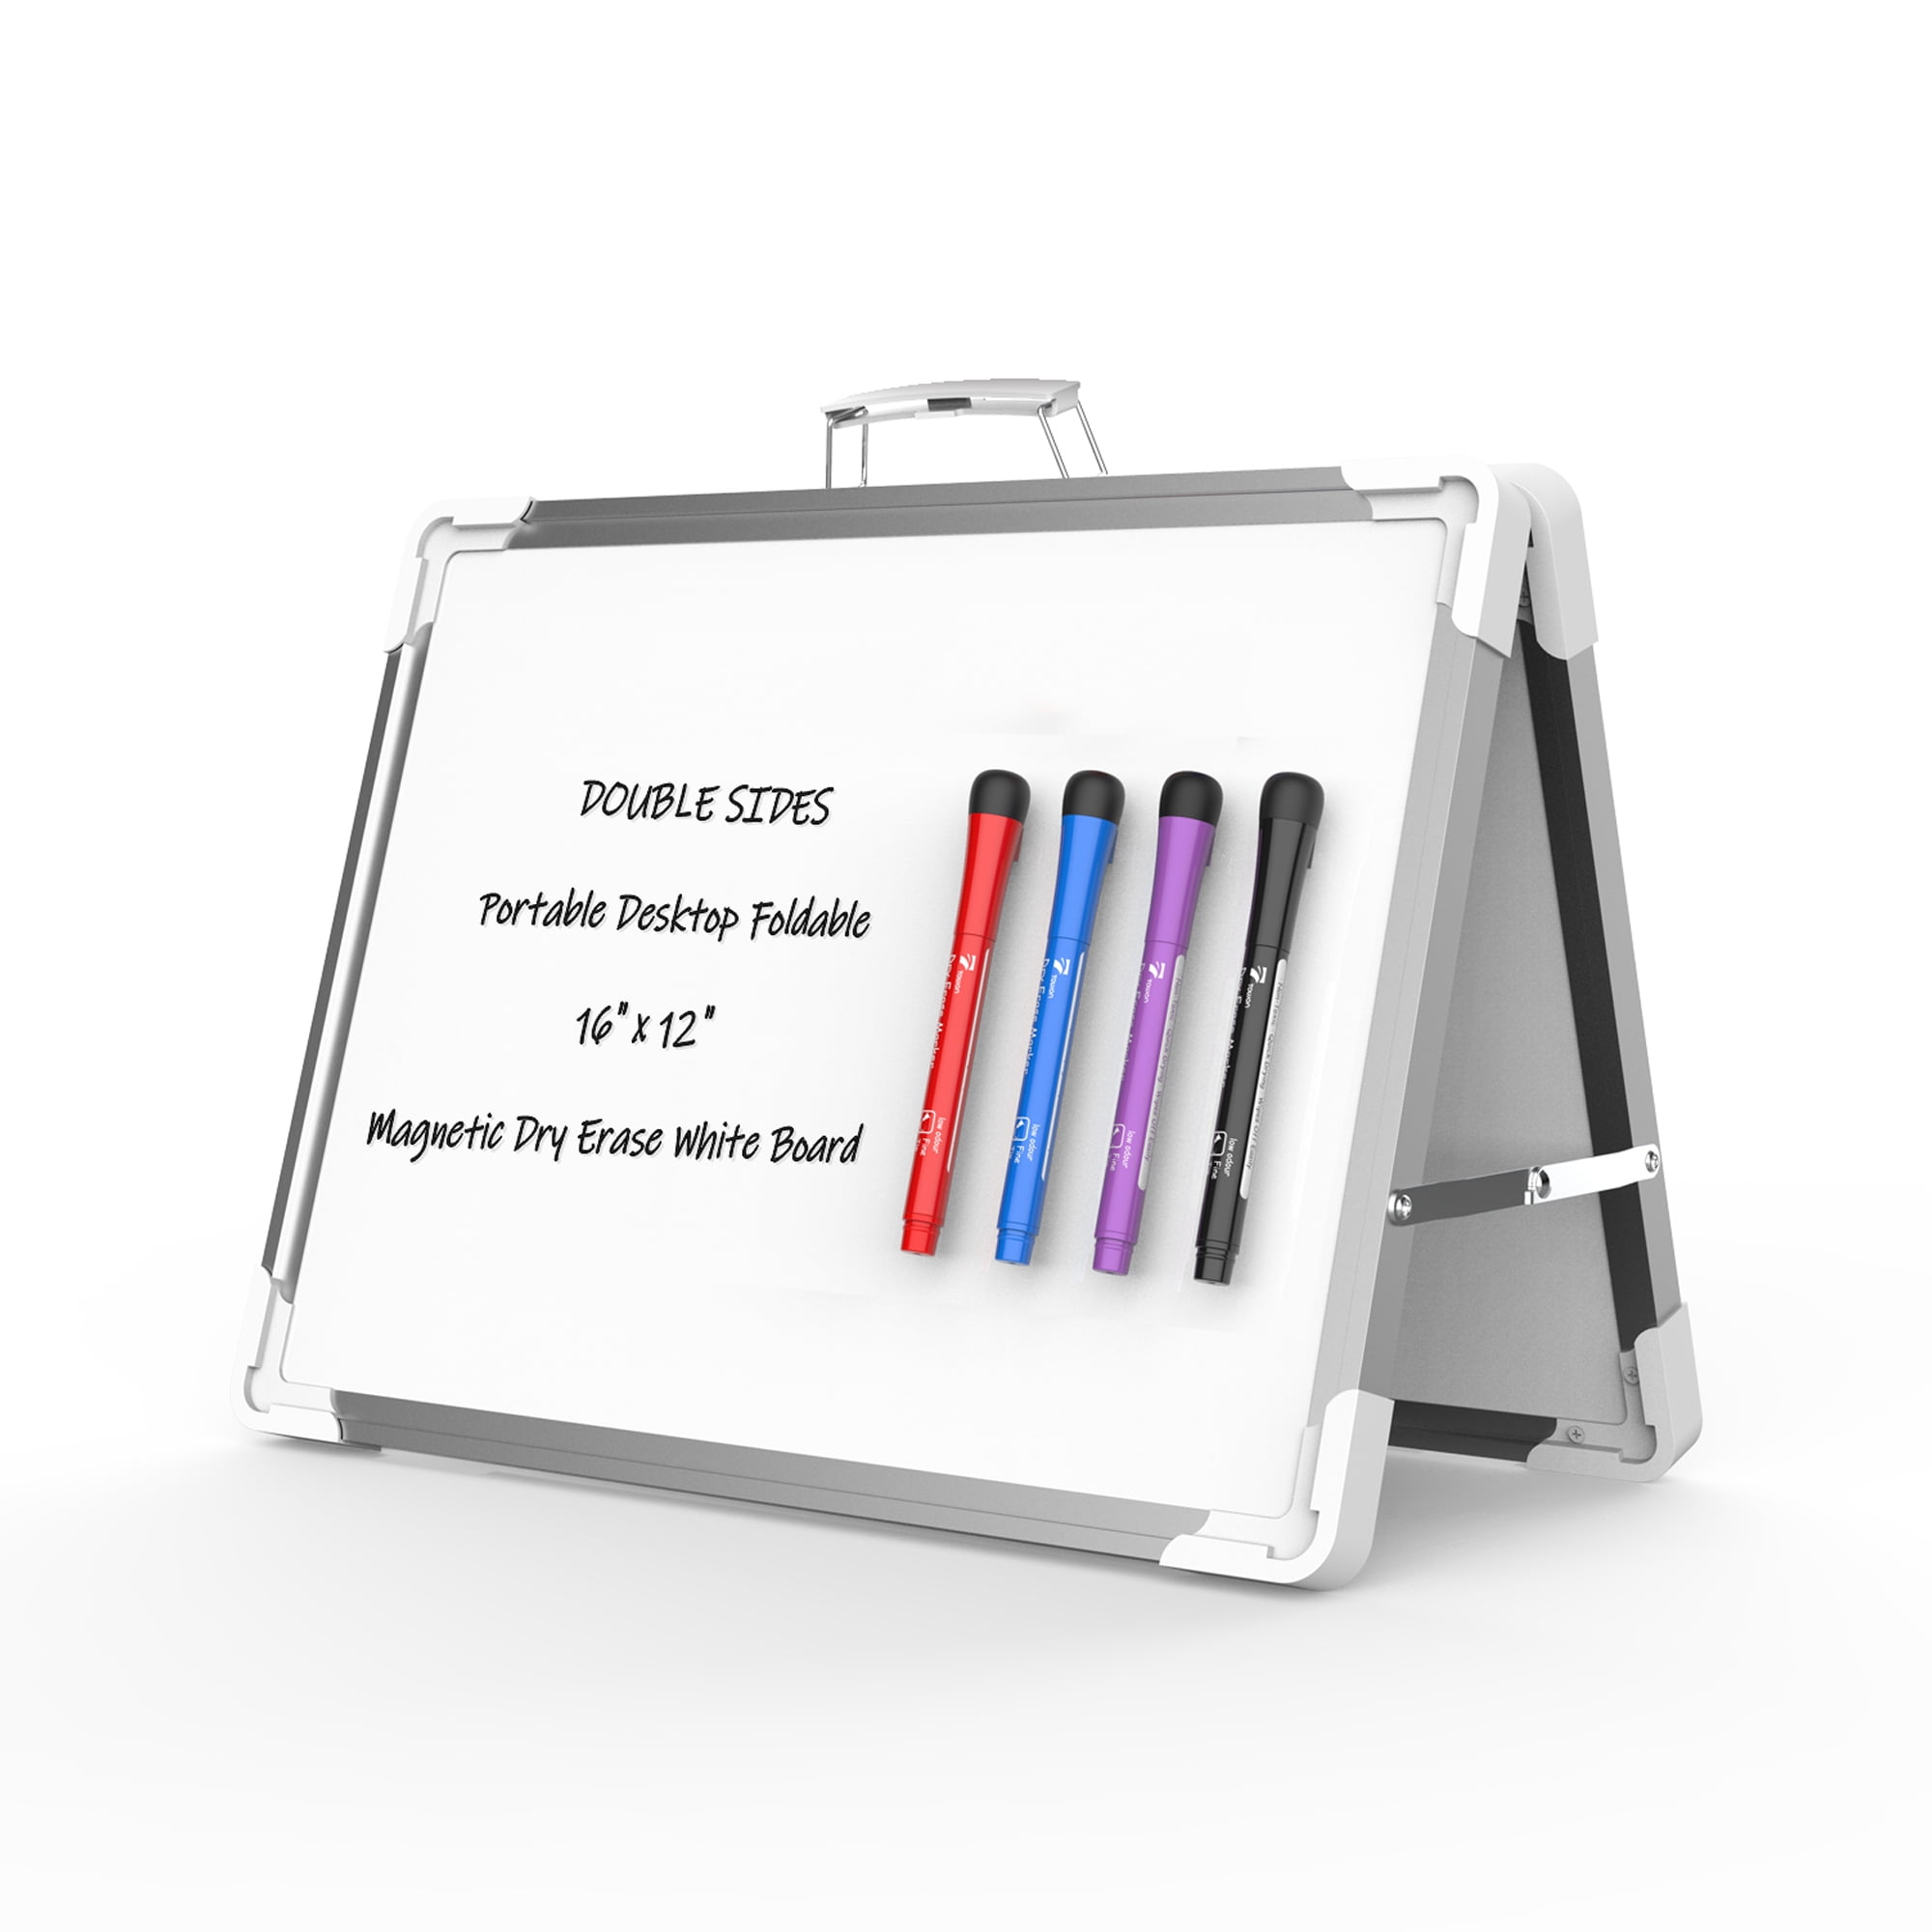 Hensigt Valnød Biskop TOWON Double-Sided White Board Small Magnetic Dry Erase Board with Handle  and 4 Markers - 16"x12" Portable Foldable Desk Whiteboard Pizarra for Kids  Adults - Walmart.com